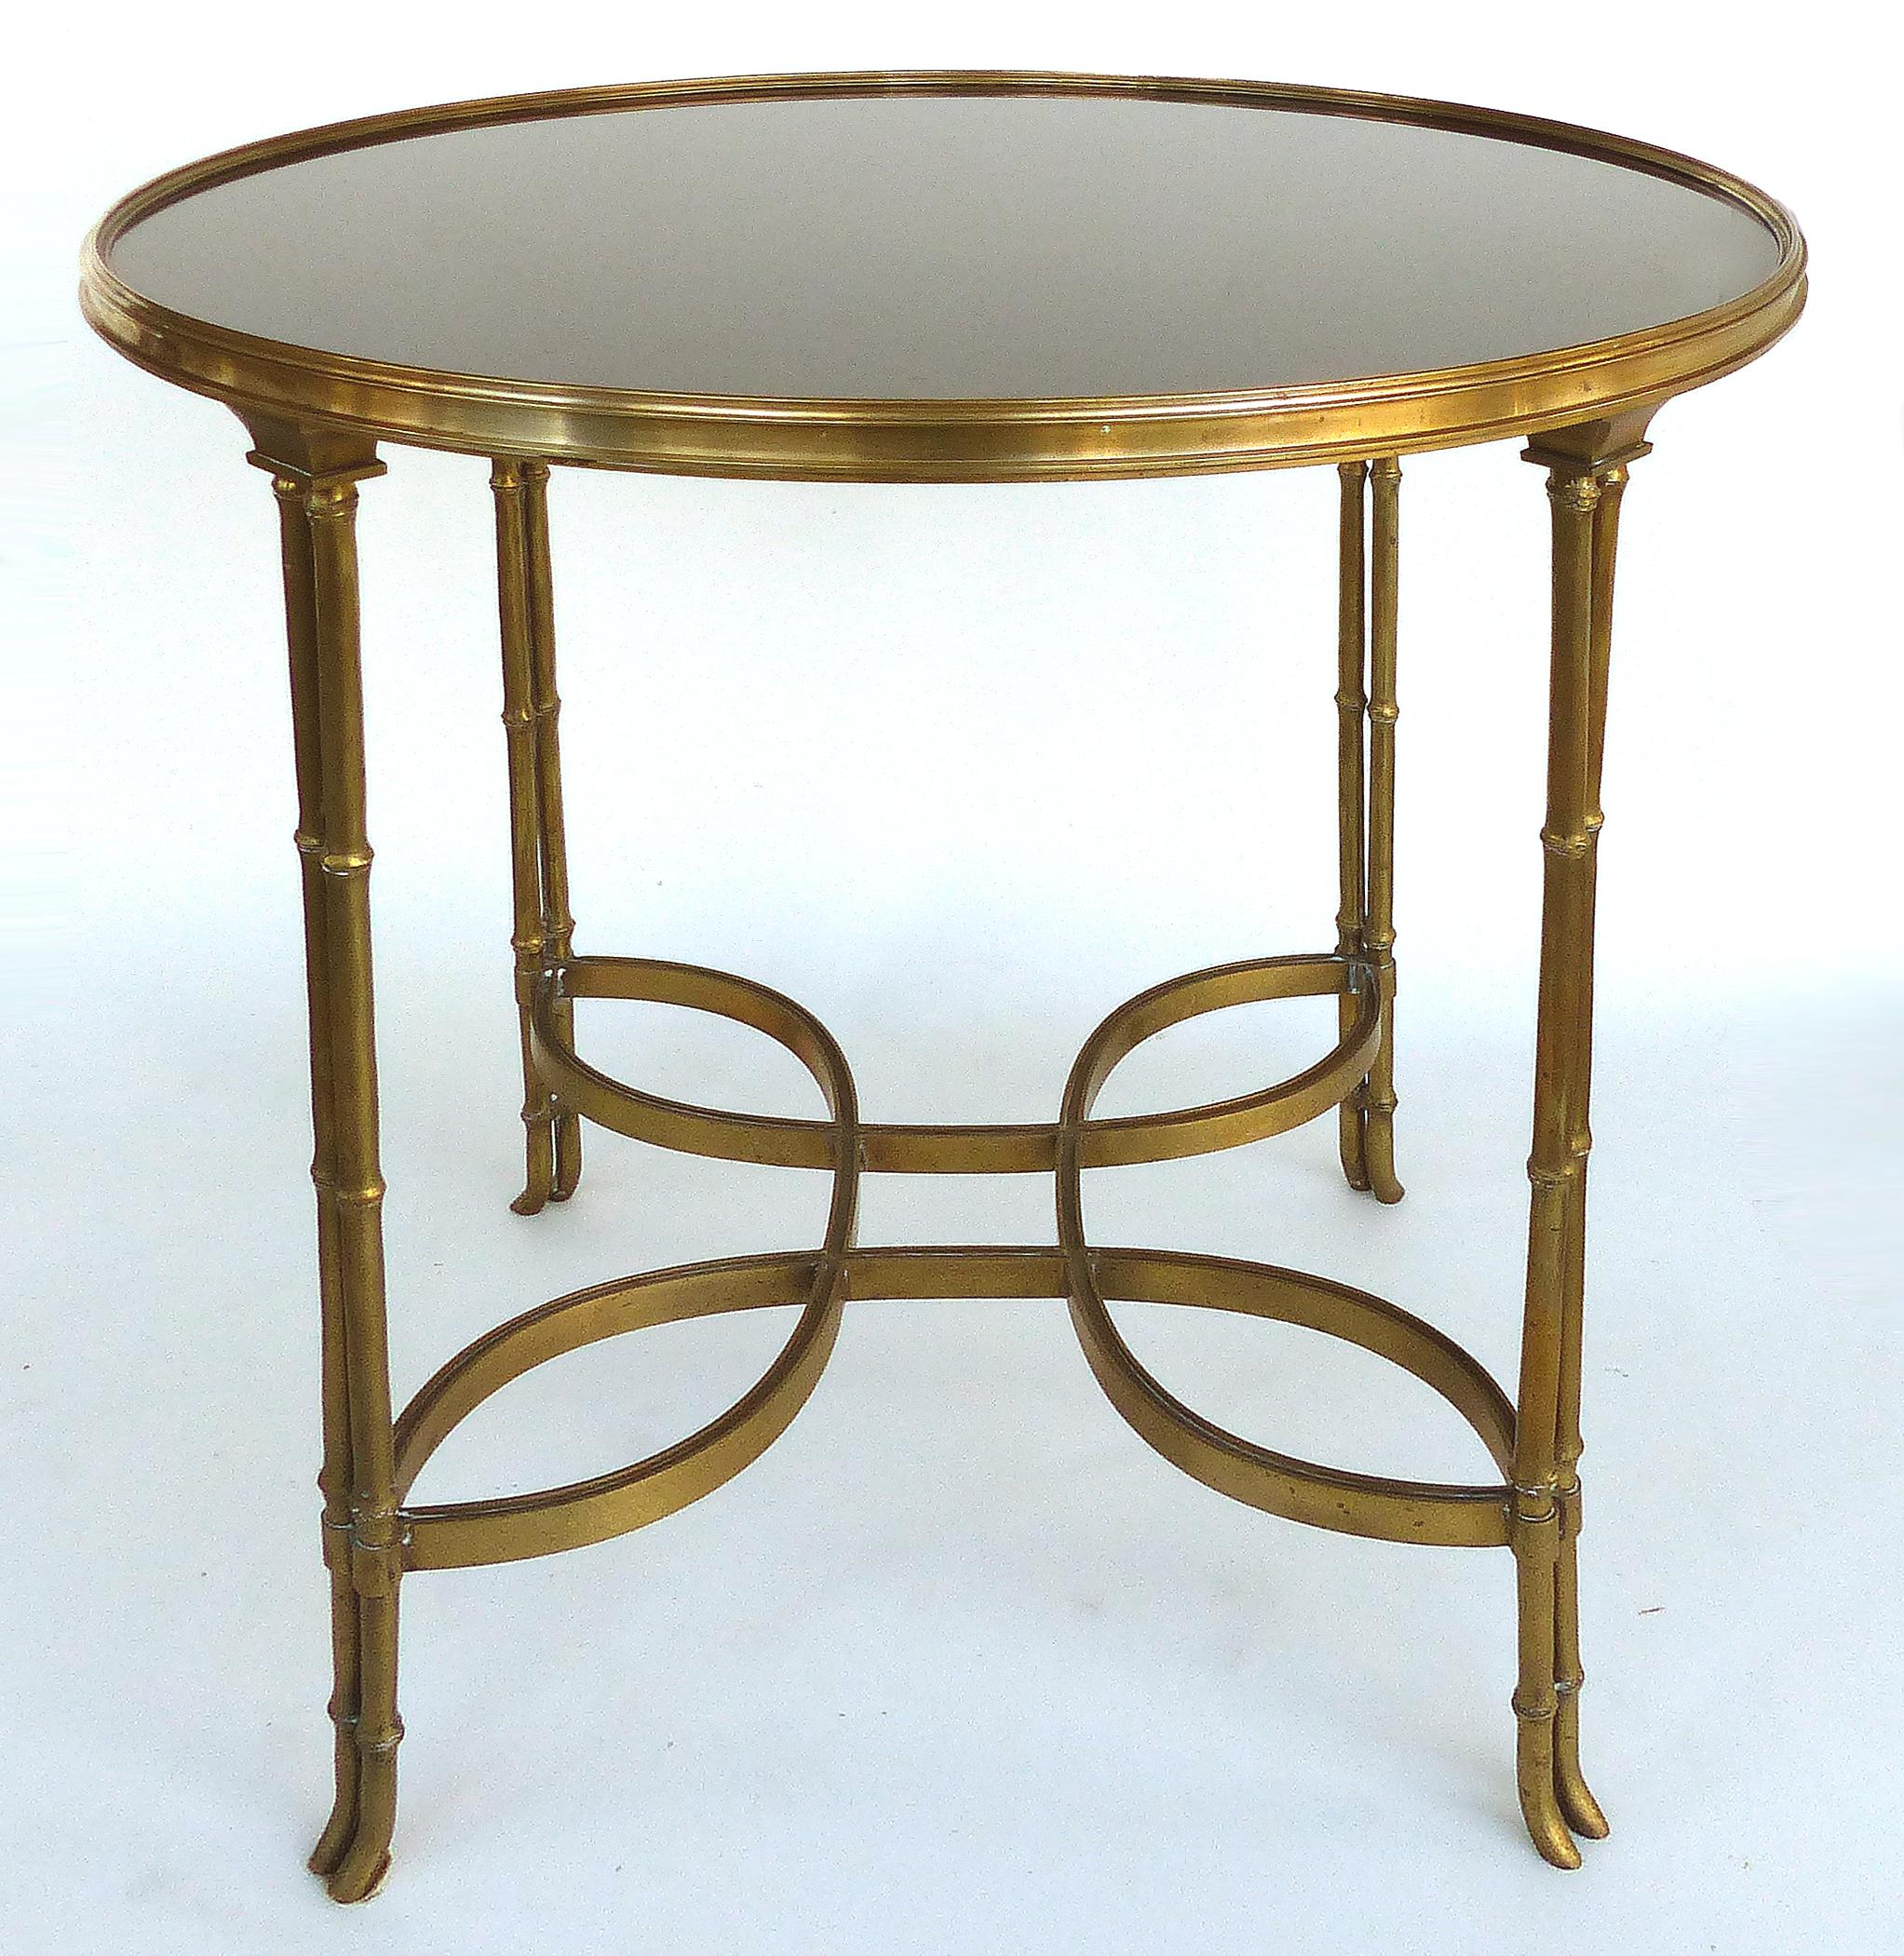 Brass and Granite Gueridon Table with Faux Bamboo Legs in Maison Jansen Style

Offered for sale is a brass gueridon side table with faux bamboo legs and an inset black granite top. The table is quite substantial in structure and is therefore very